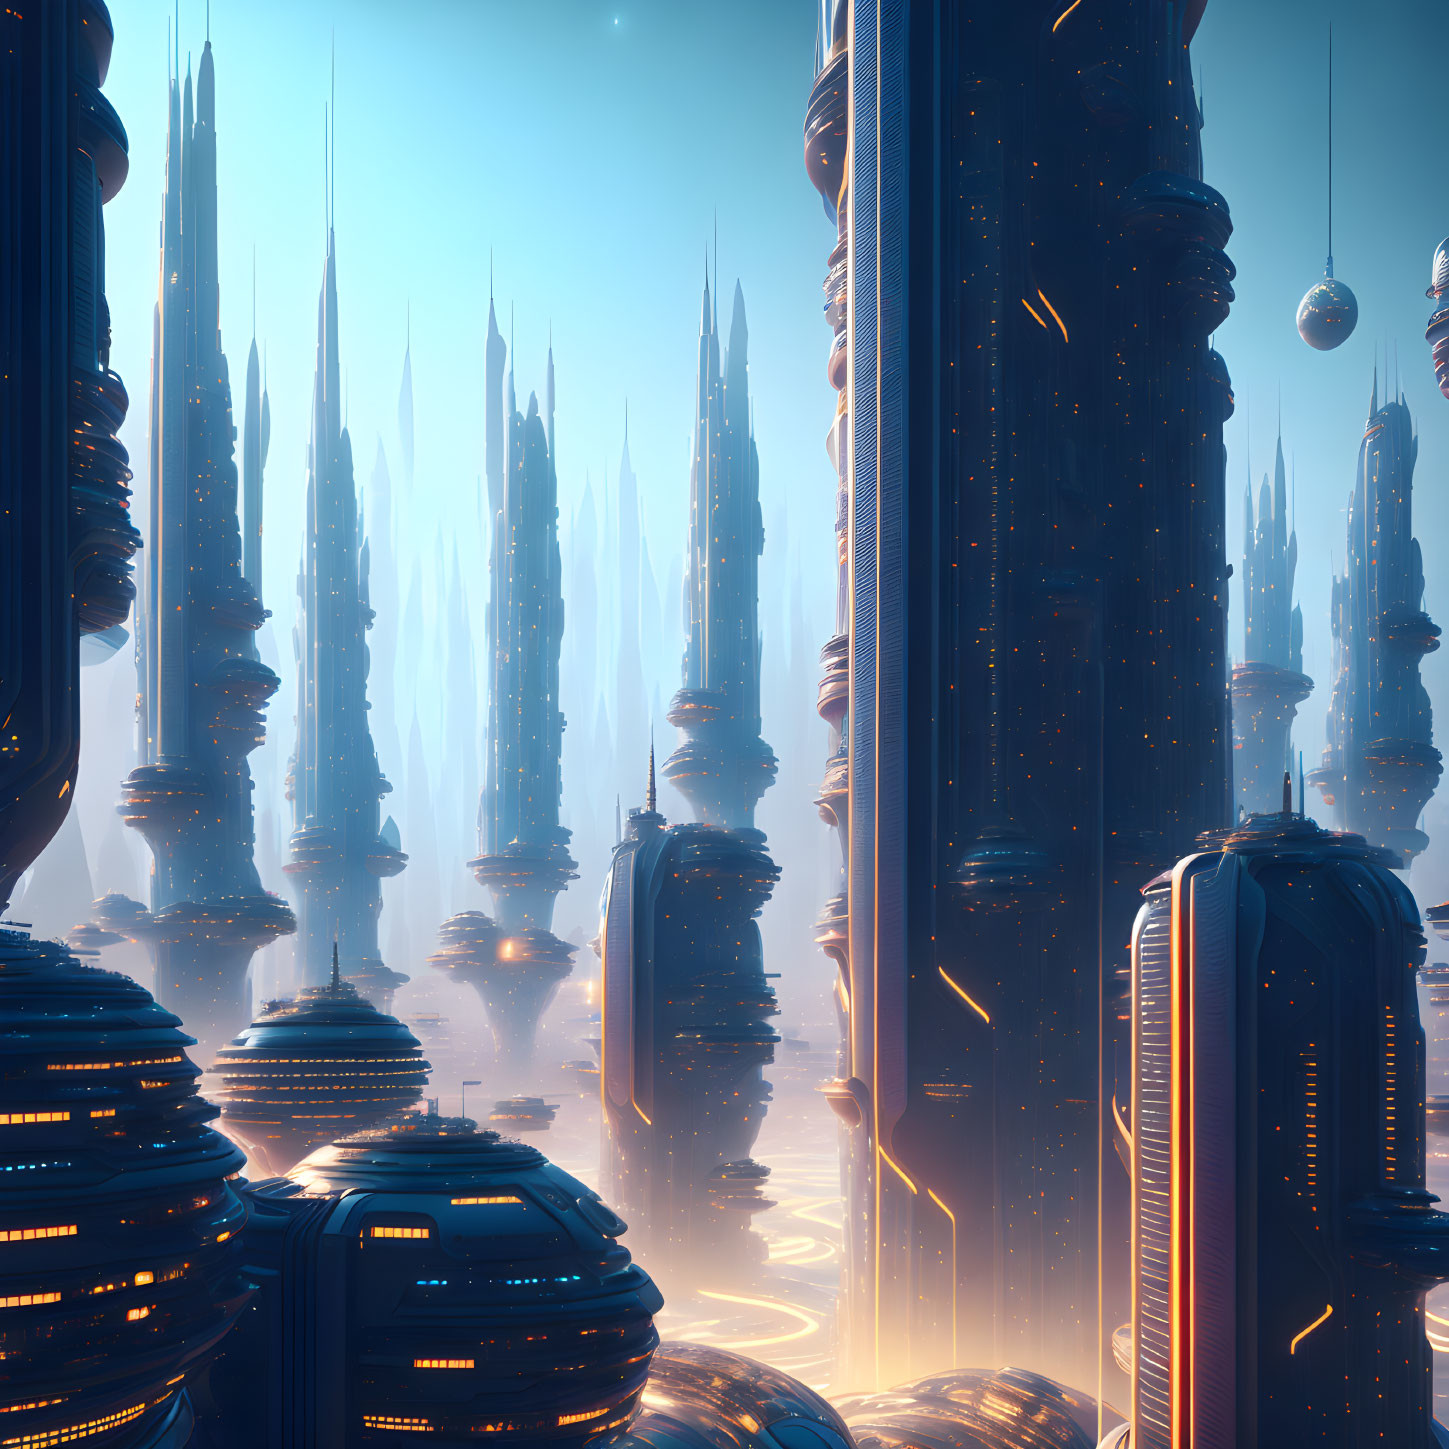 Futuristic cityscape with towering spires and floating structures under a blue sky